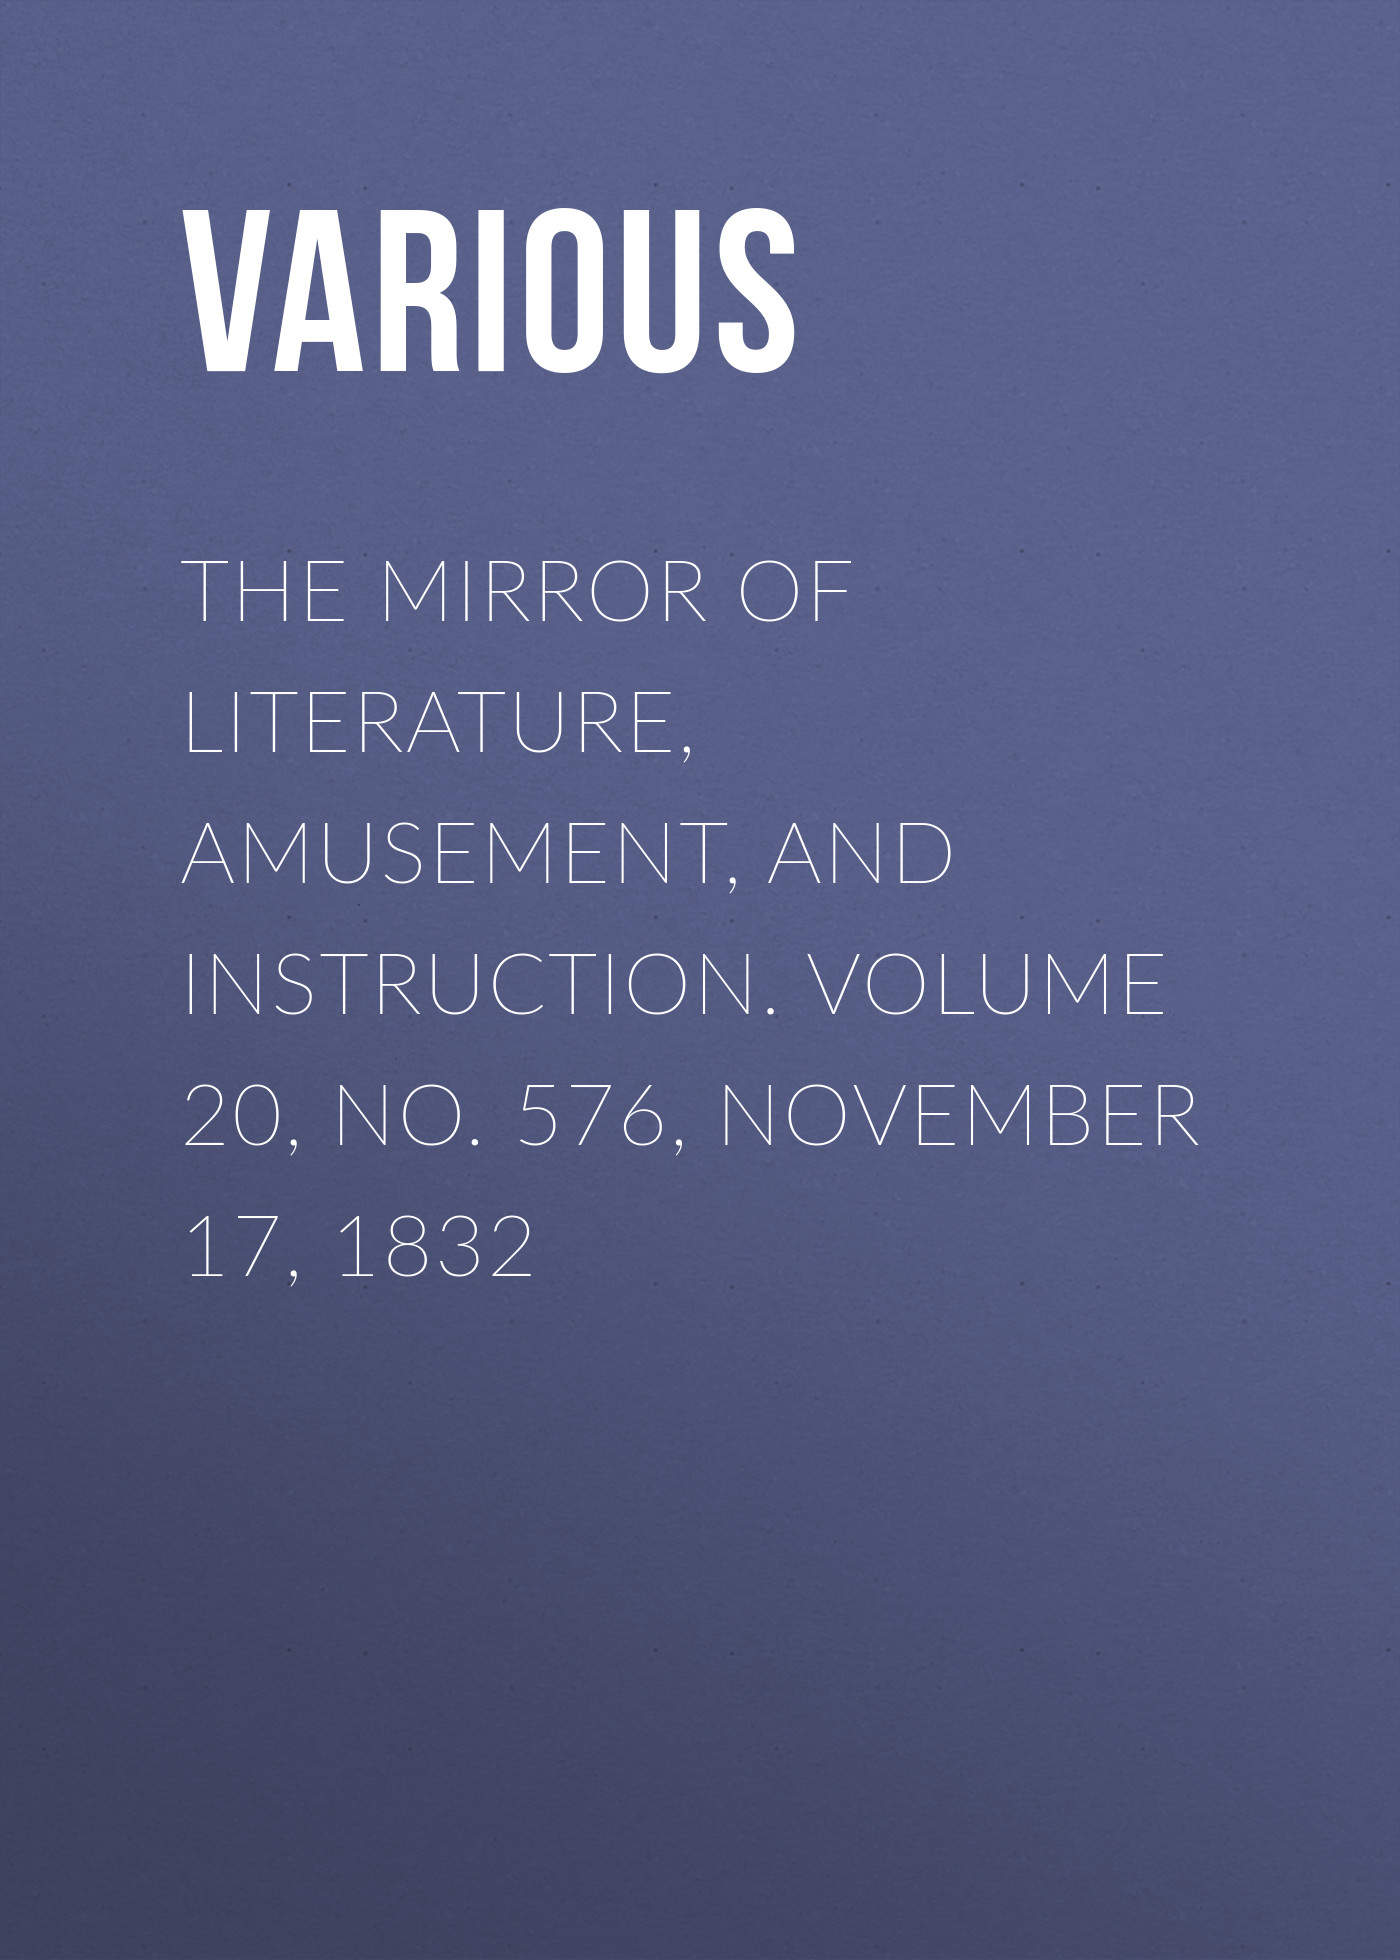 Various The Mirror of Literature, Amusement, and Instruction. Volume 20, No. 576, November 17, 1832